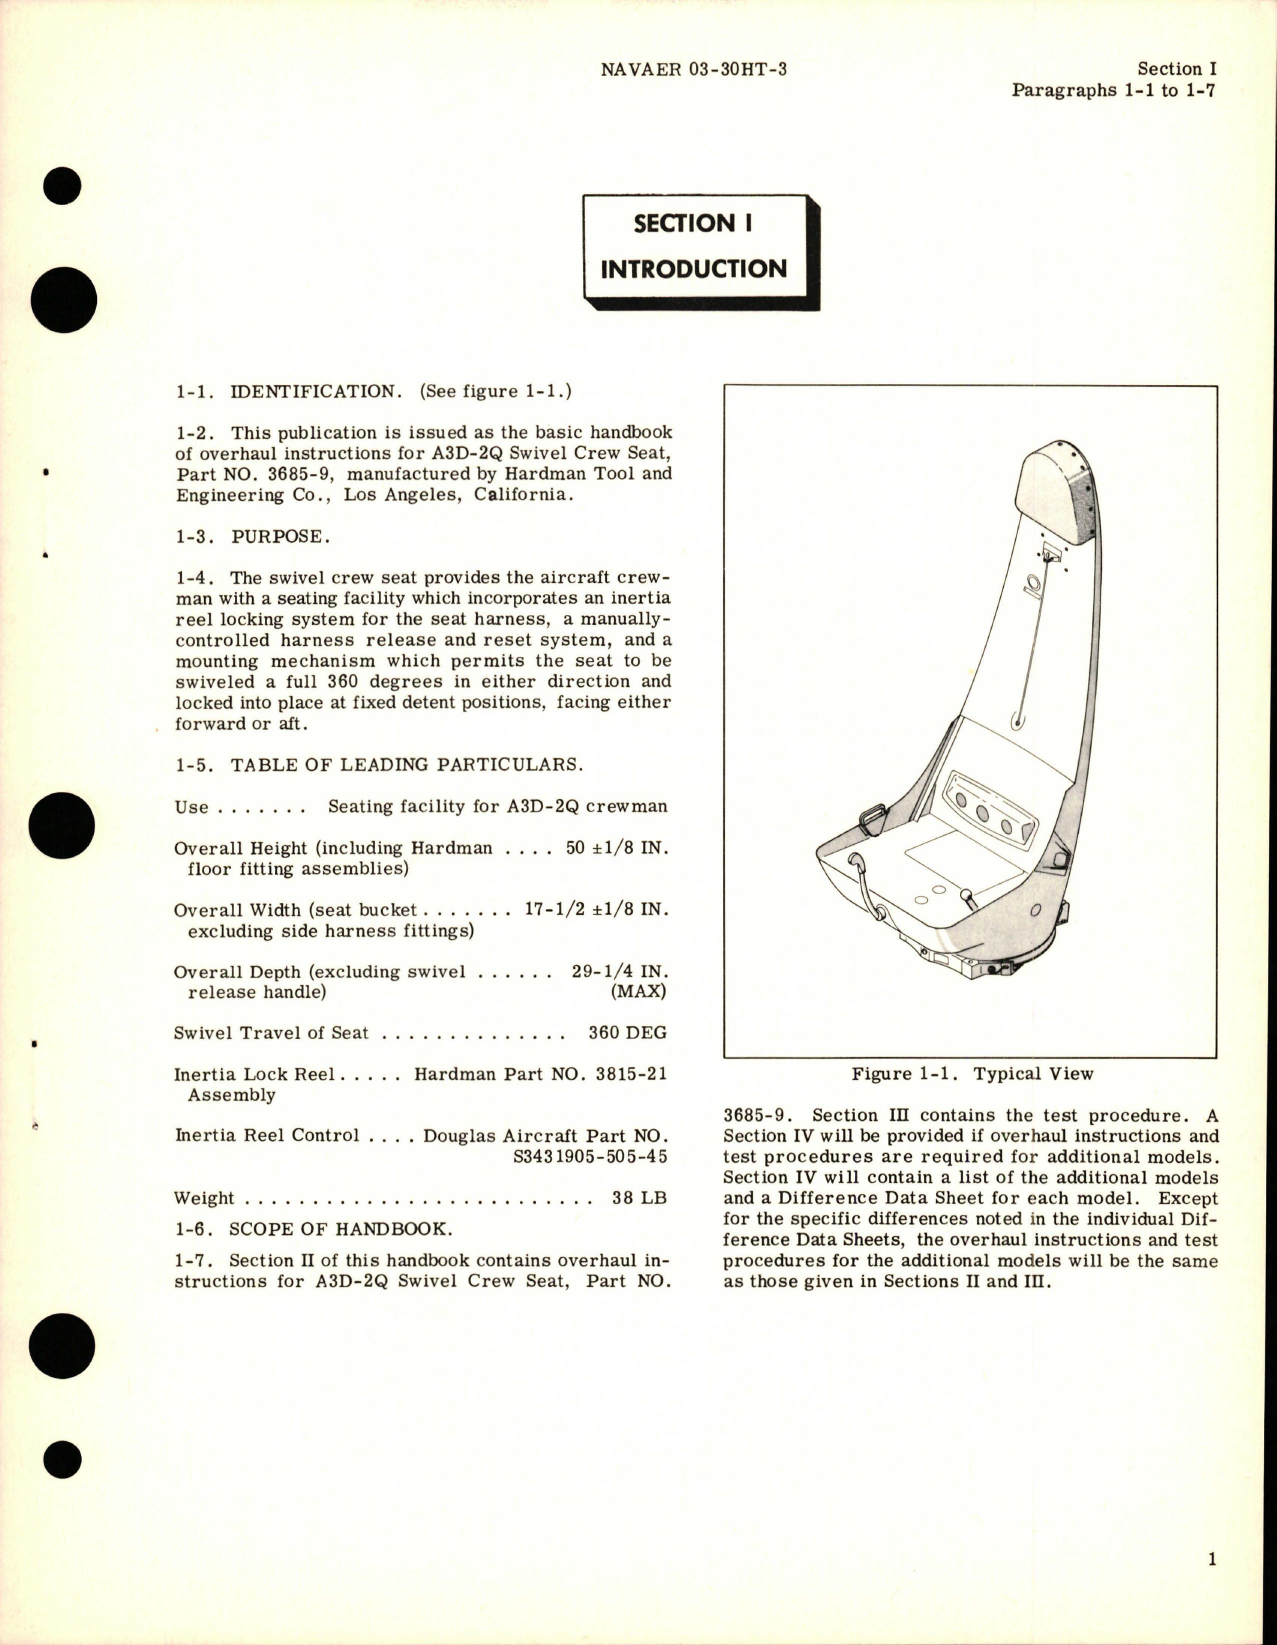 Sample page 5 from AirCorps Library document: Overhaul Instructions for Swivel Crew Seat - A3D-2Q - Part 3685-9